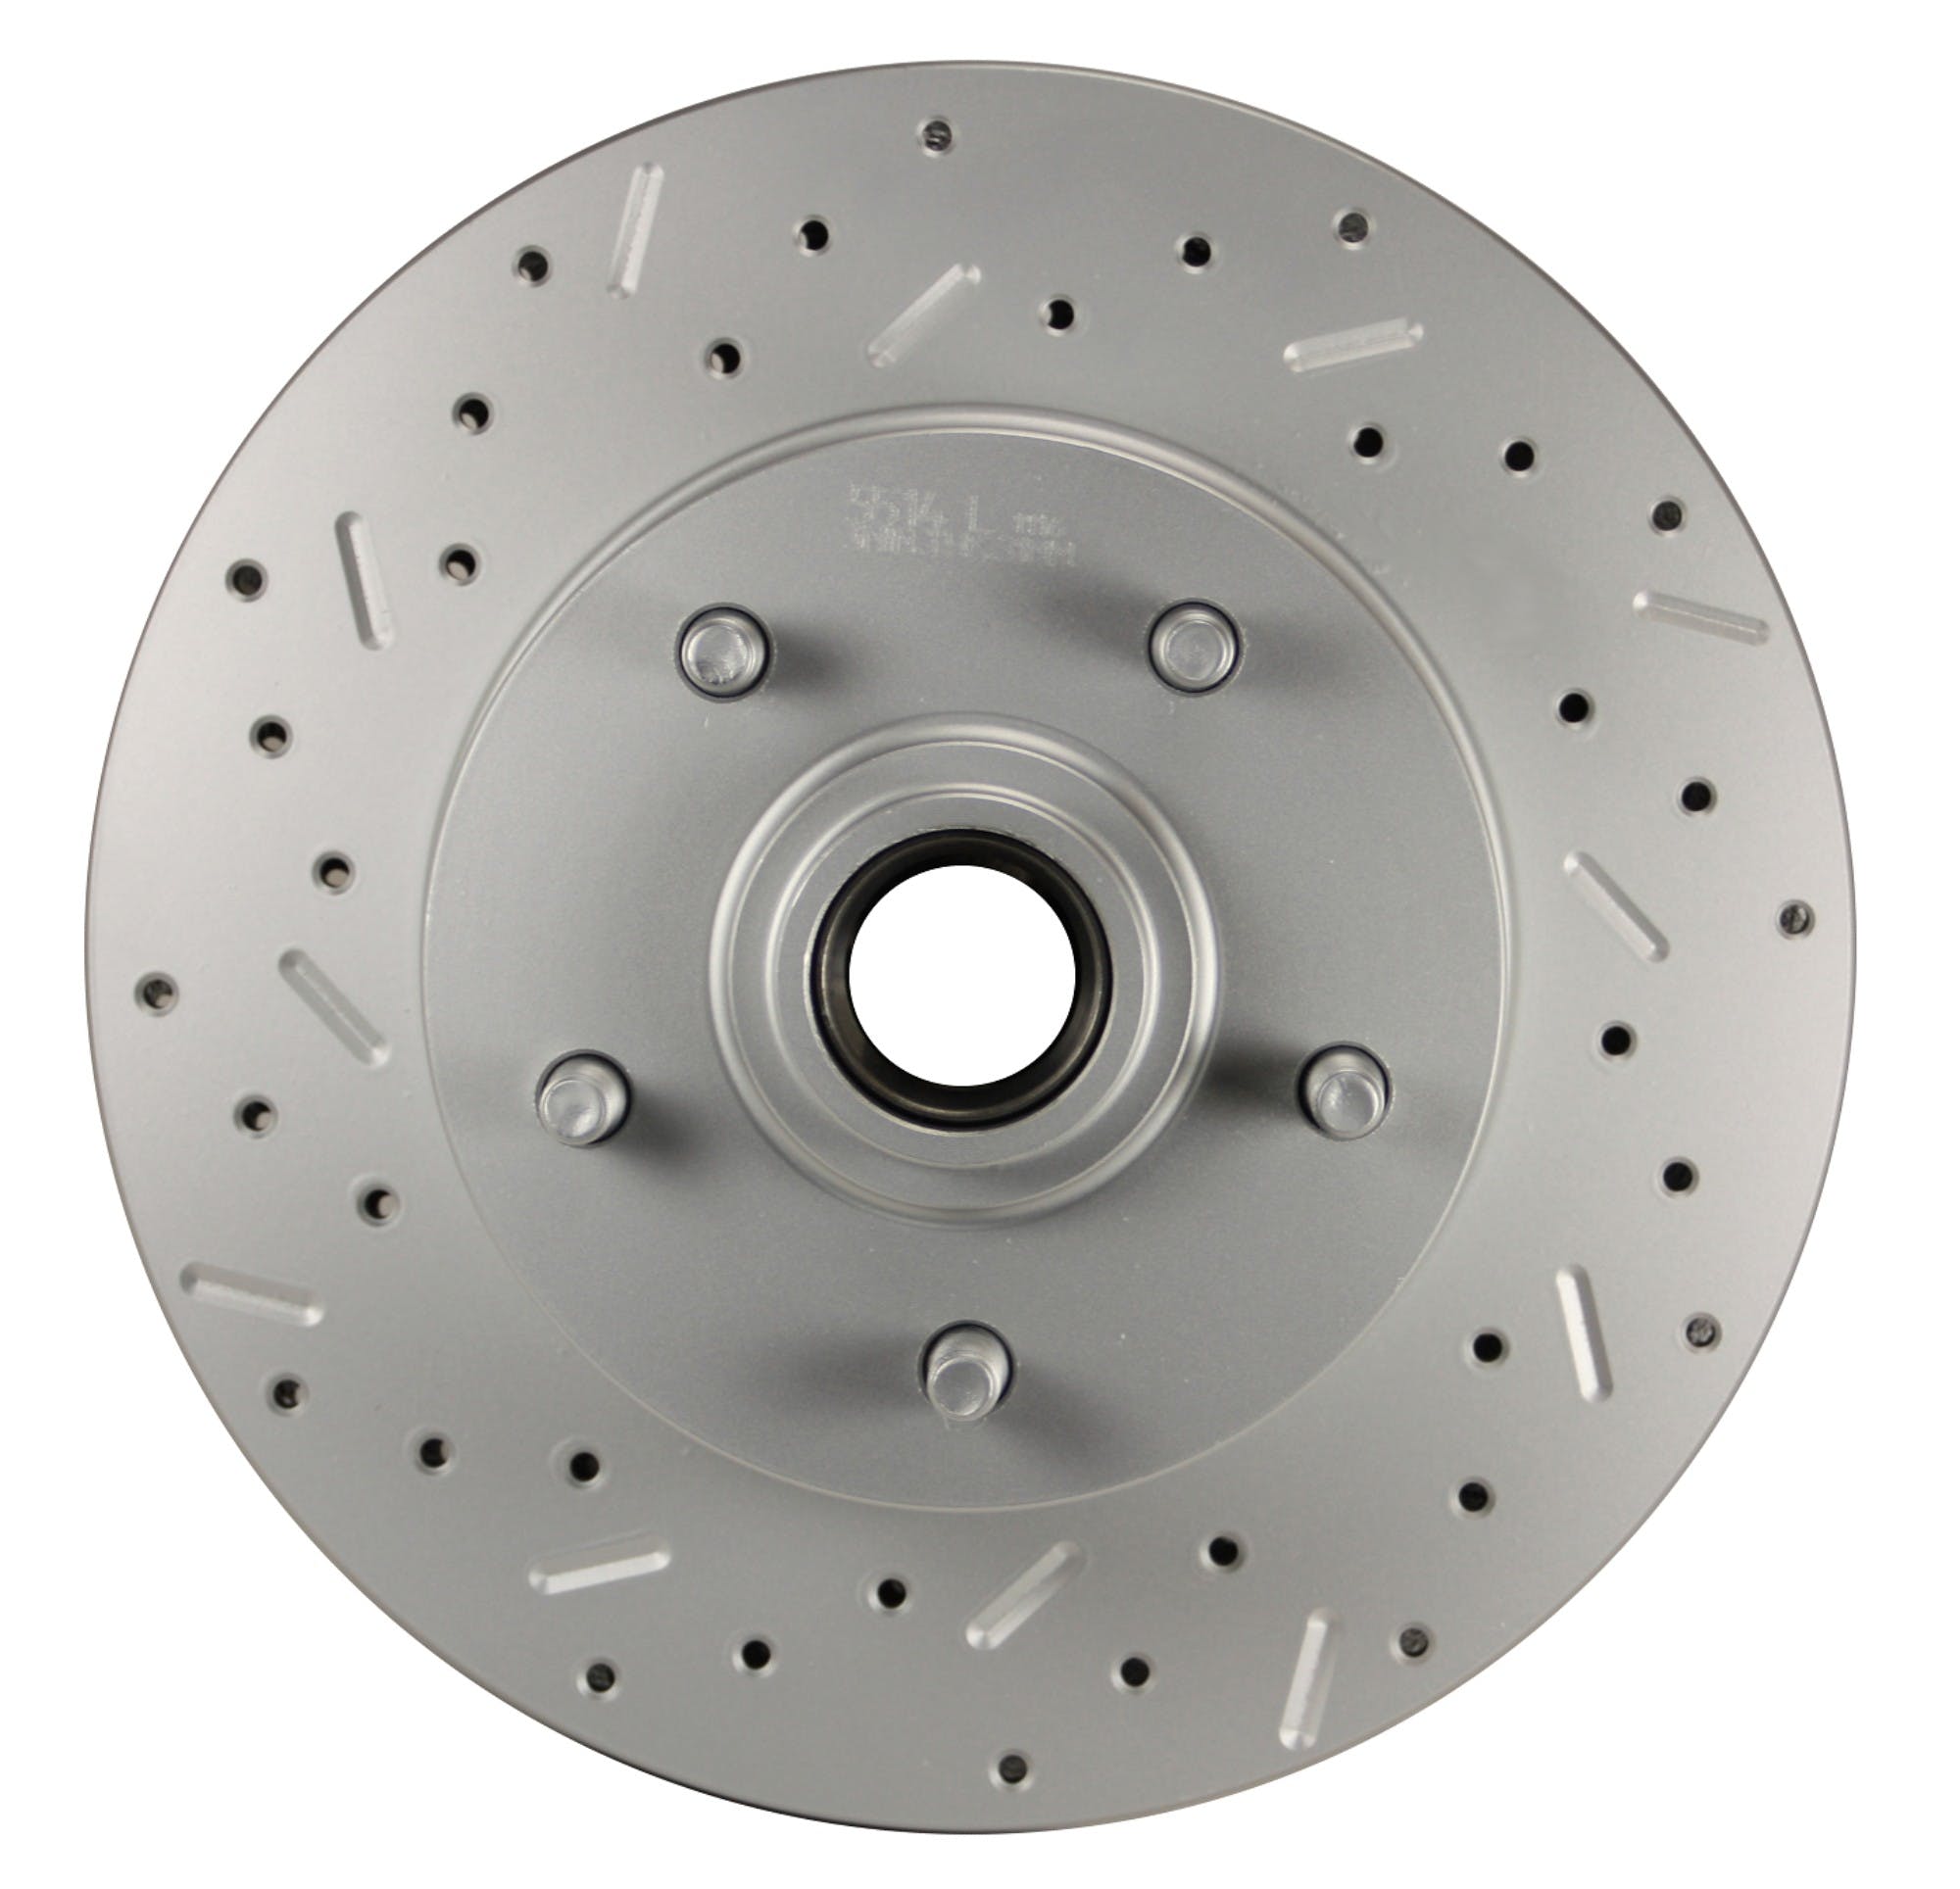 LEED Brakes 5514 LCDS Rotor Left side Cross drilled and slotted